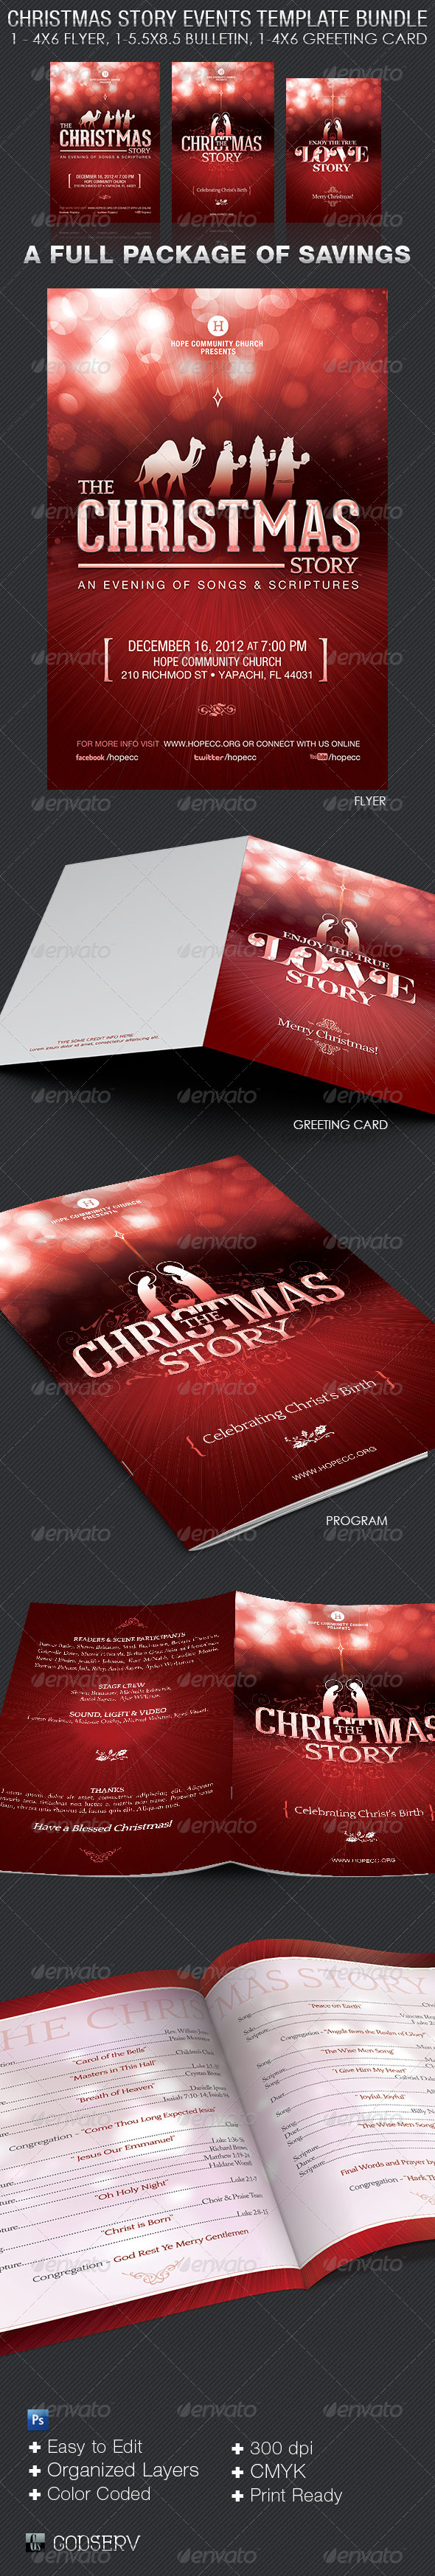 Christmas-Story-Events-Bundle-Preview